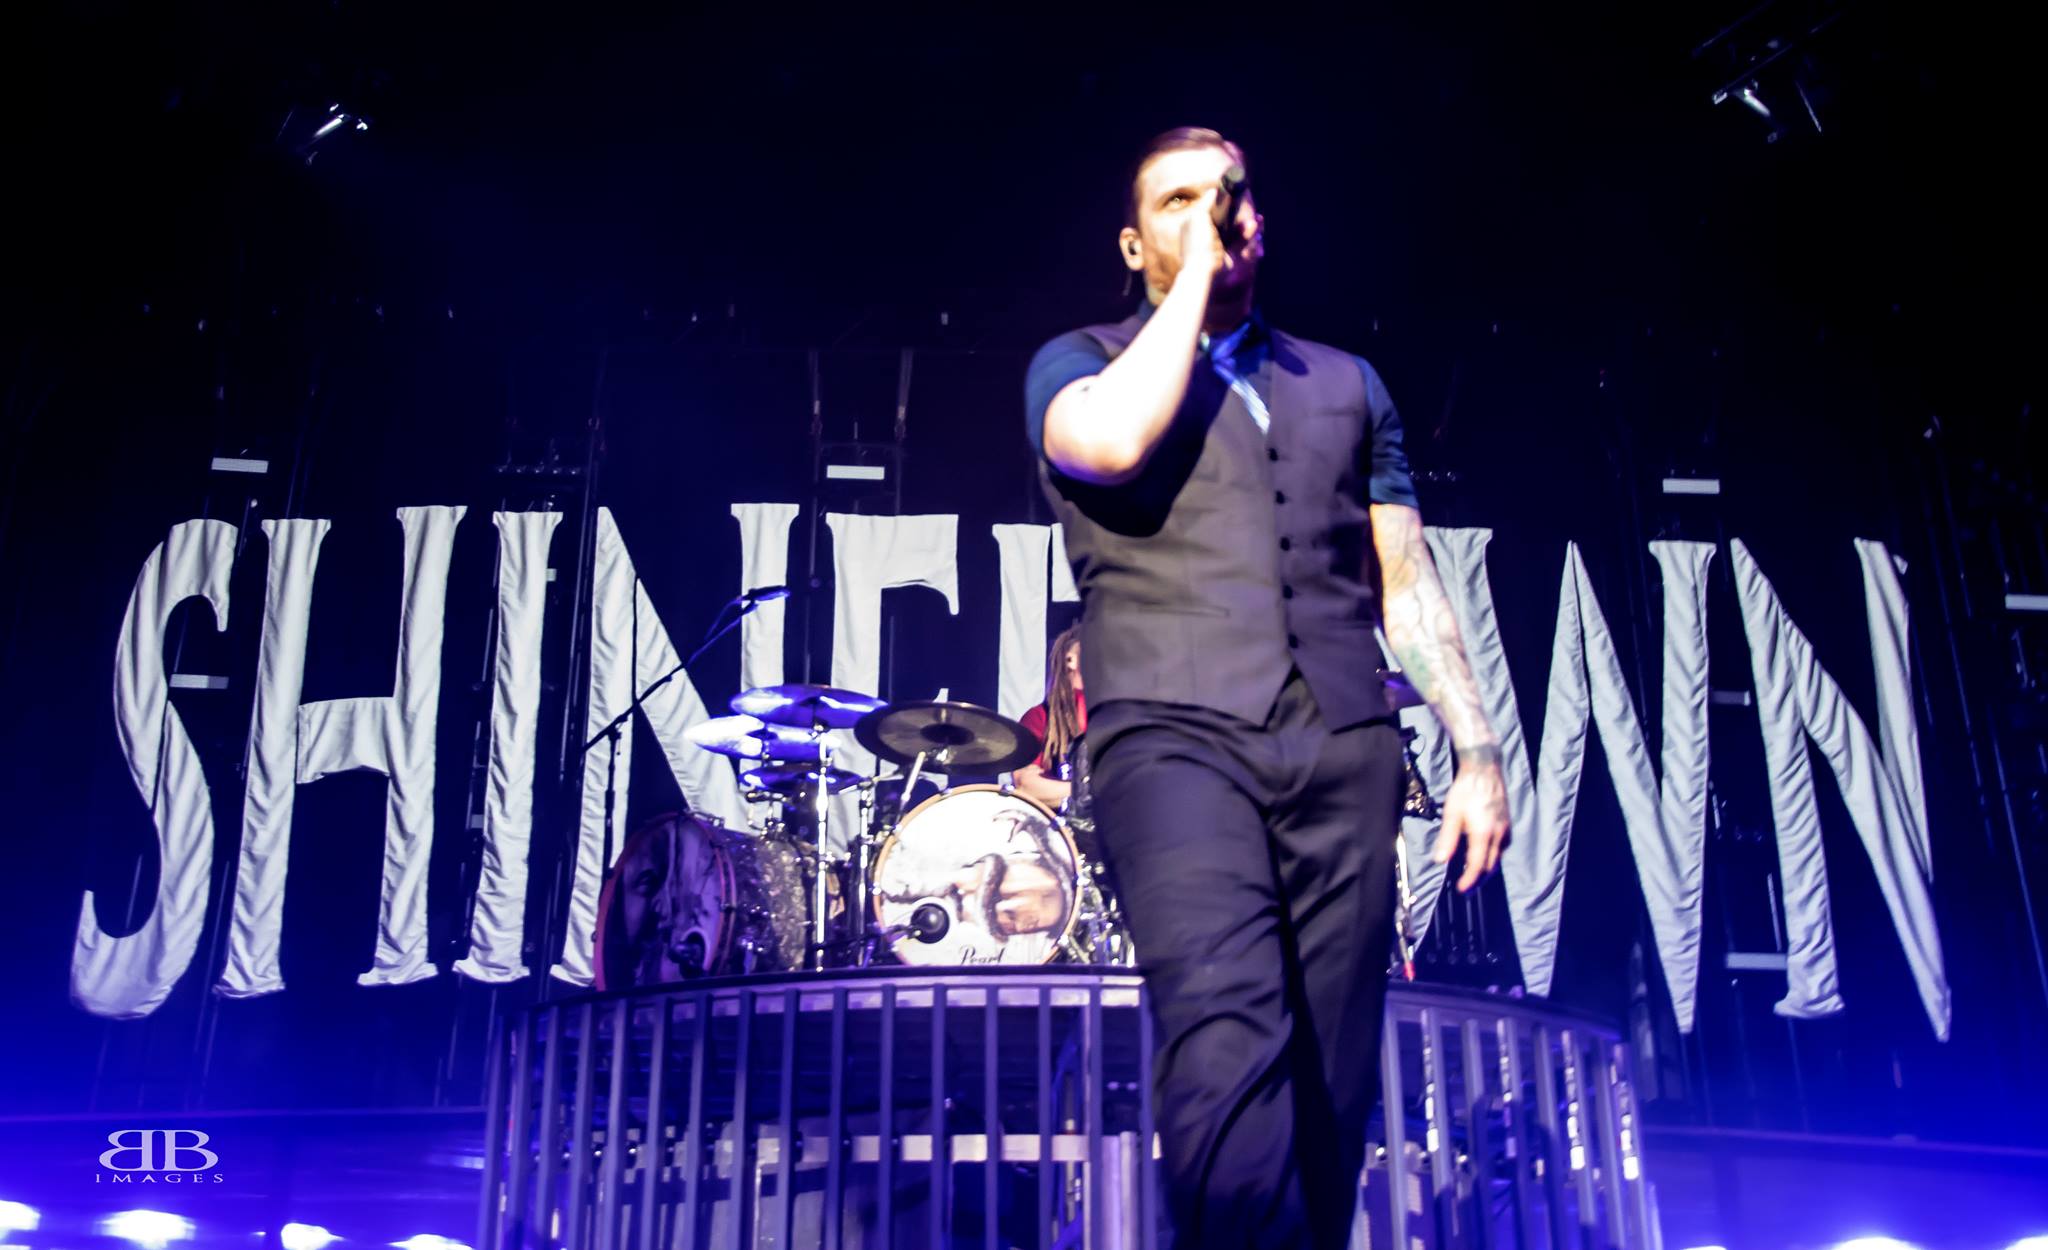 Shinedown at Carnival of Madness in The Woodlands